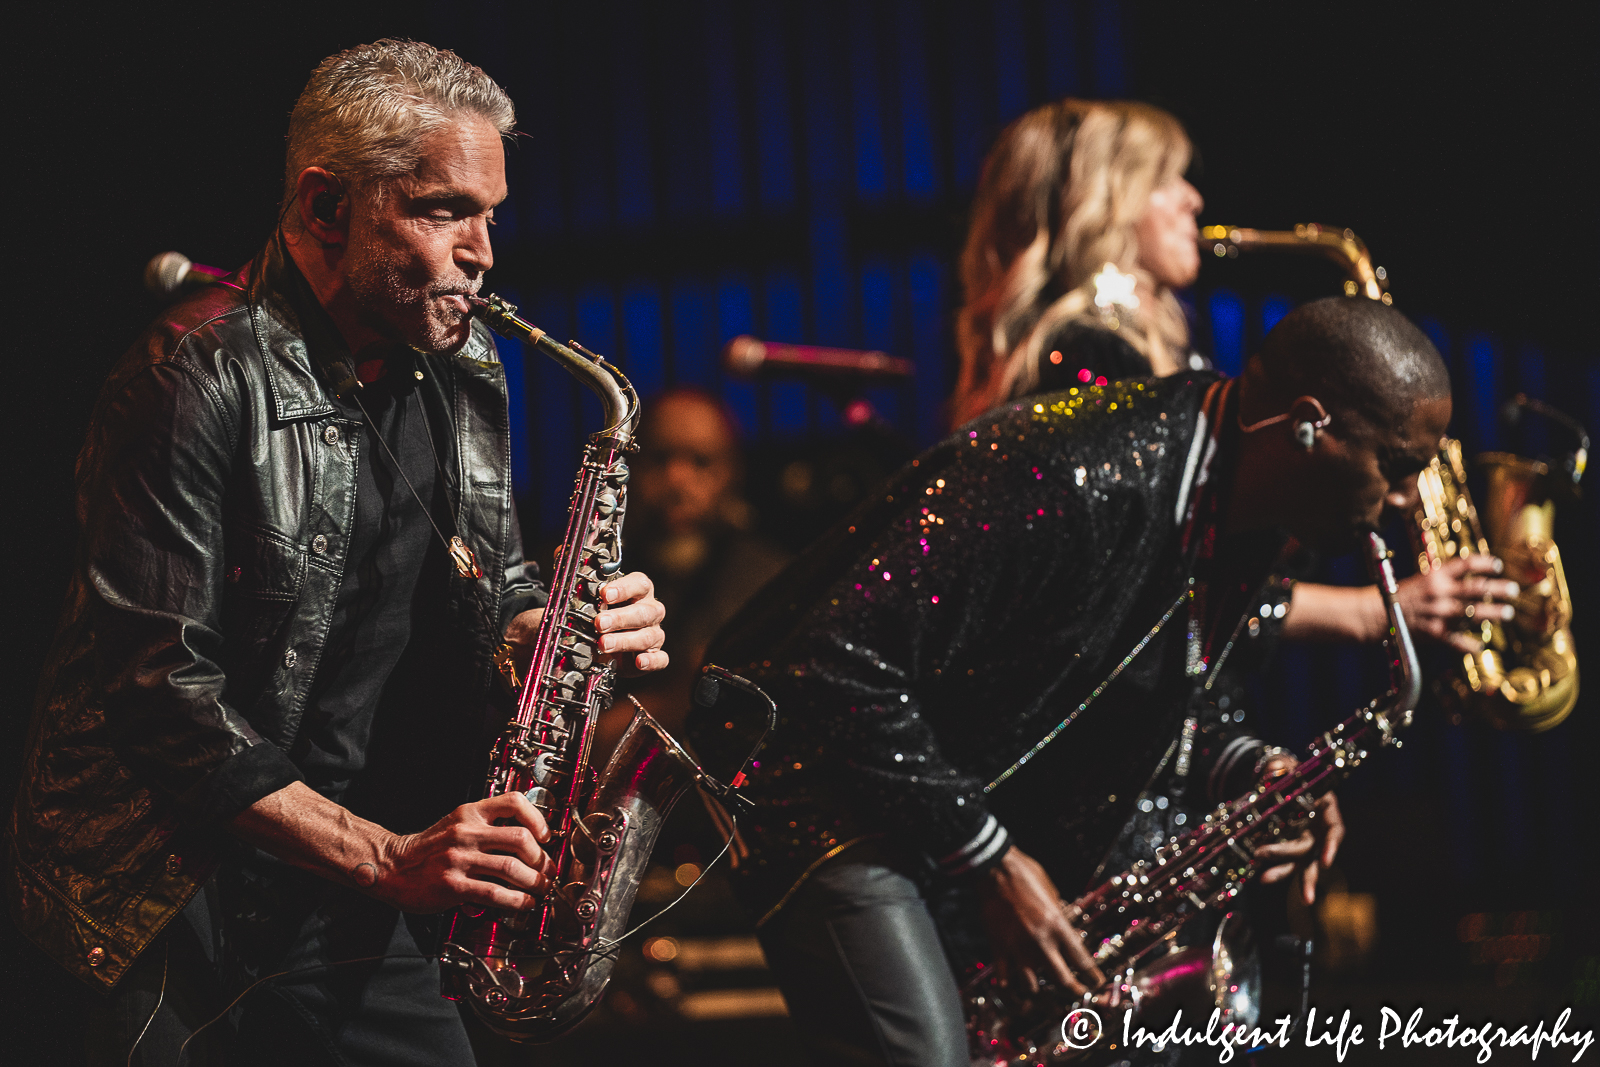 Saxophonists Dave Koz, Eric Darius and Candy Dulfer performing live in concert together at Muriel Kauffman Theatre in downtown Kansas City, MO on July 15, 2023.